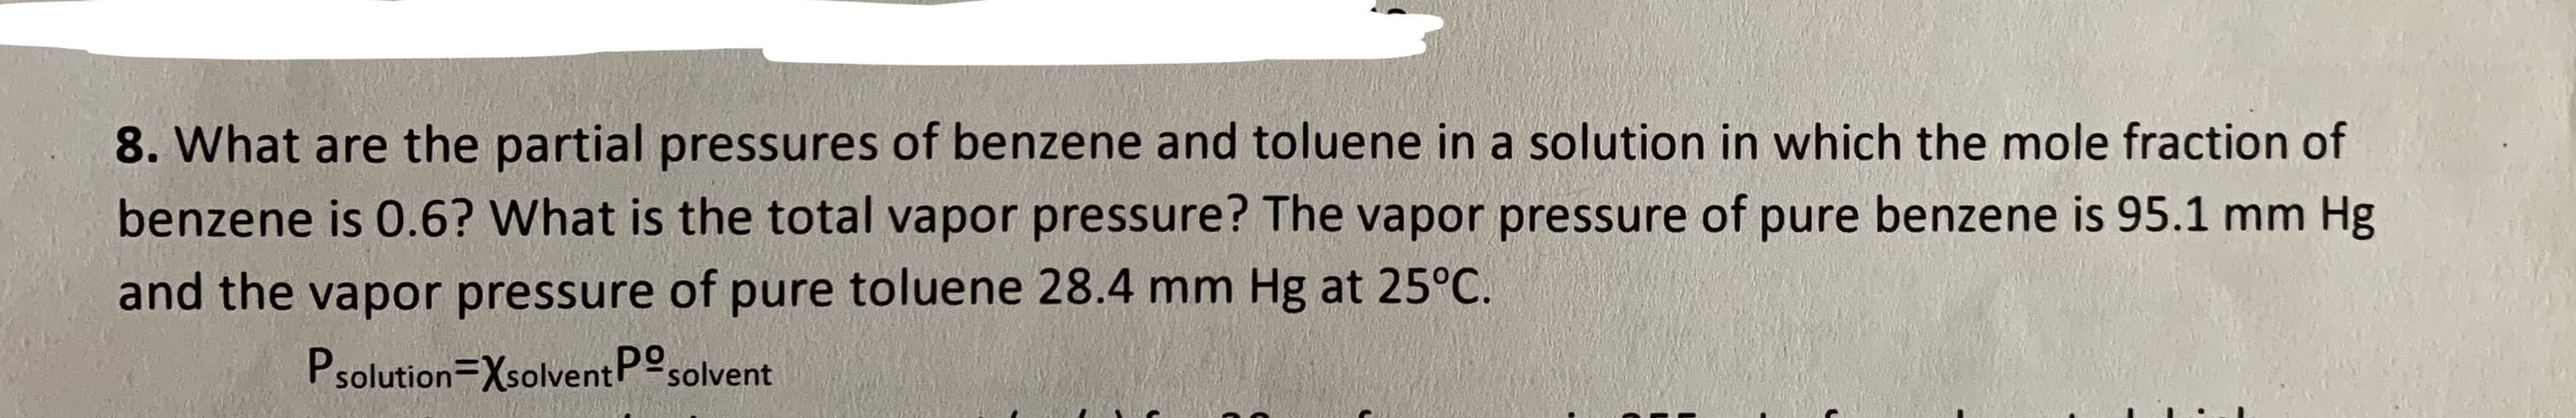 8. What are the partial pressures of benzene and toluene in a solution in which the mole fraction of
benzene is 0.6? What is the total vapor pressure? The vapor pressure of pure benzene is 95.1 mm Hg
and the vapor pressure of pure toluene 28.4 mm Hg at 25°C.
Psolution=XsolventPosolvent
